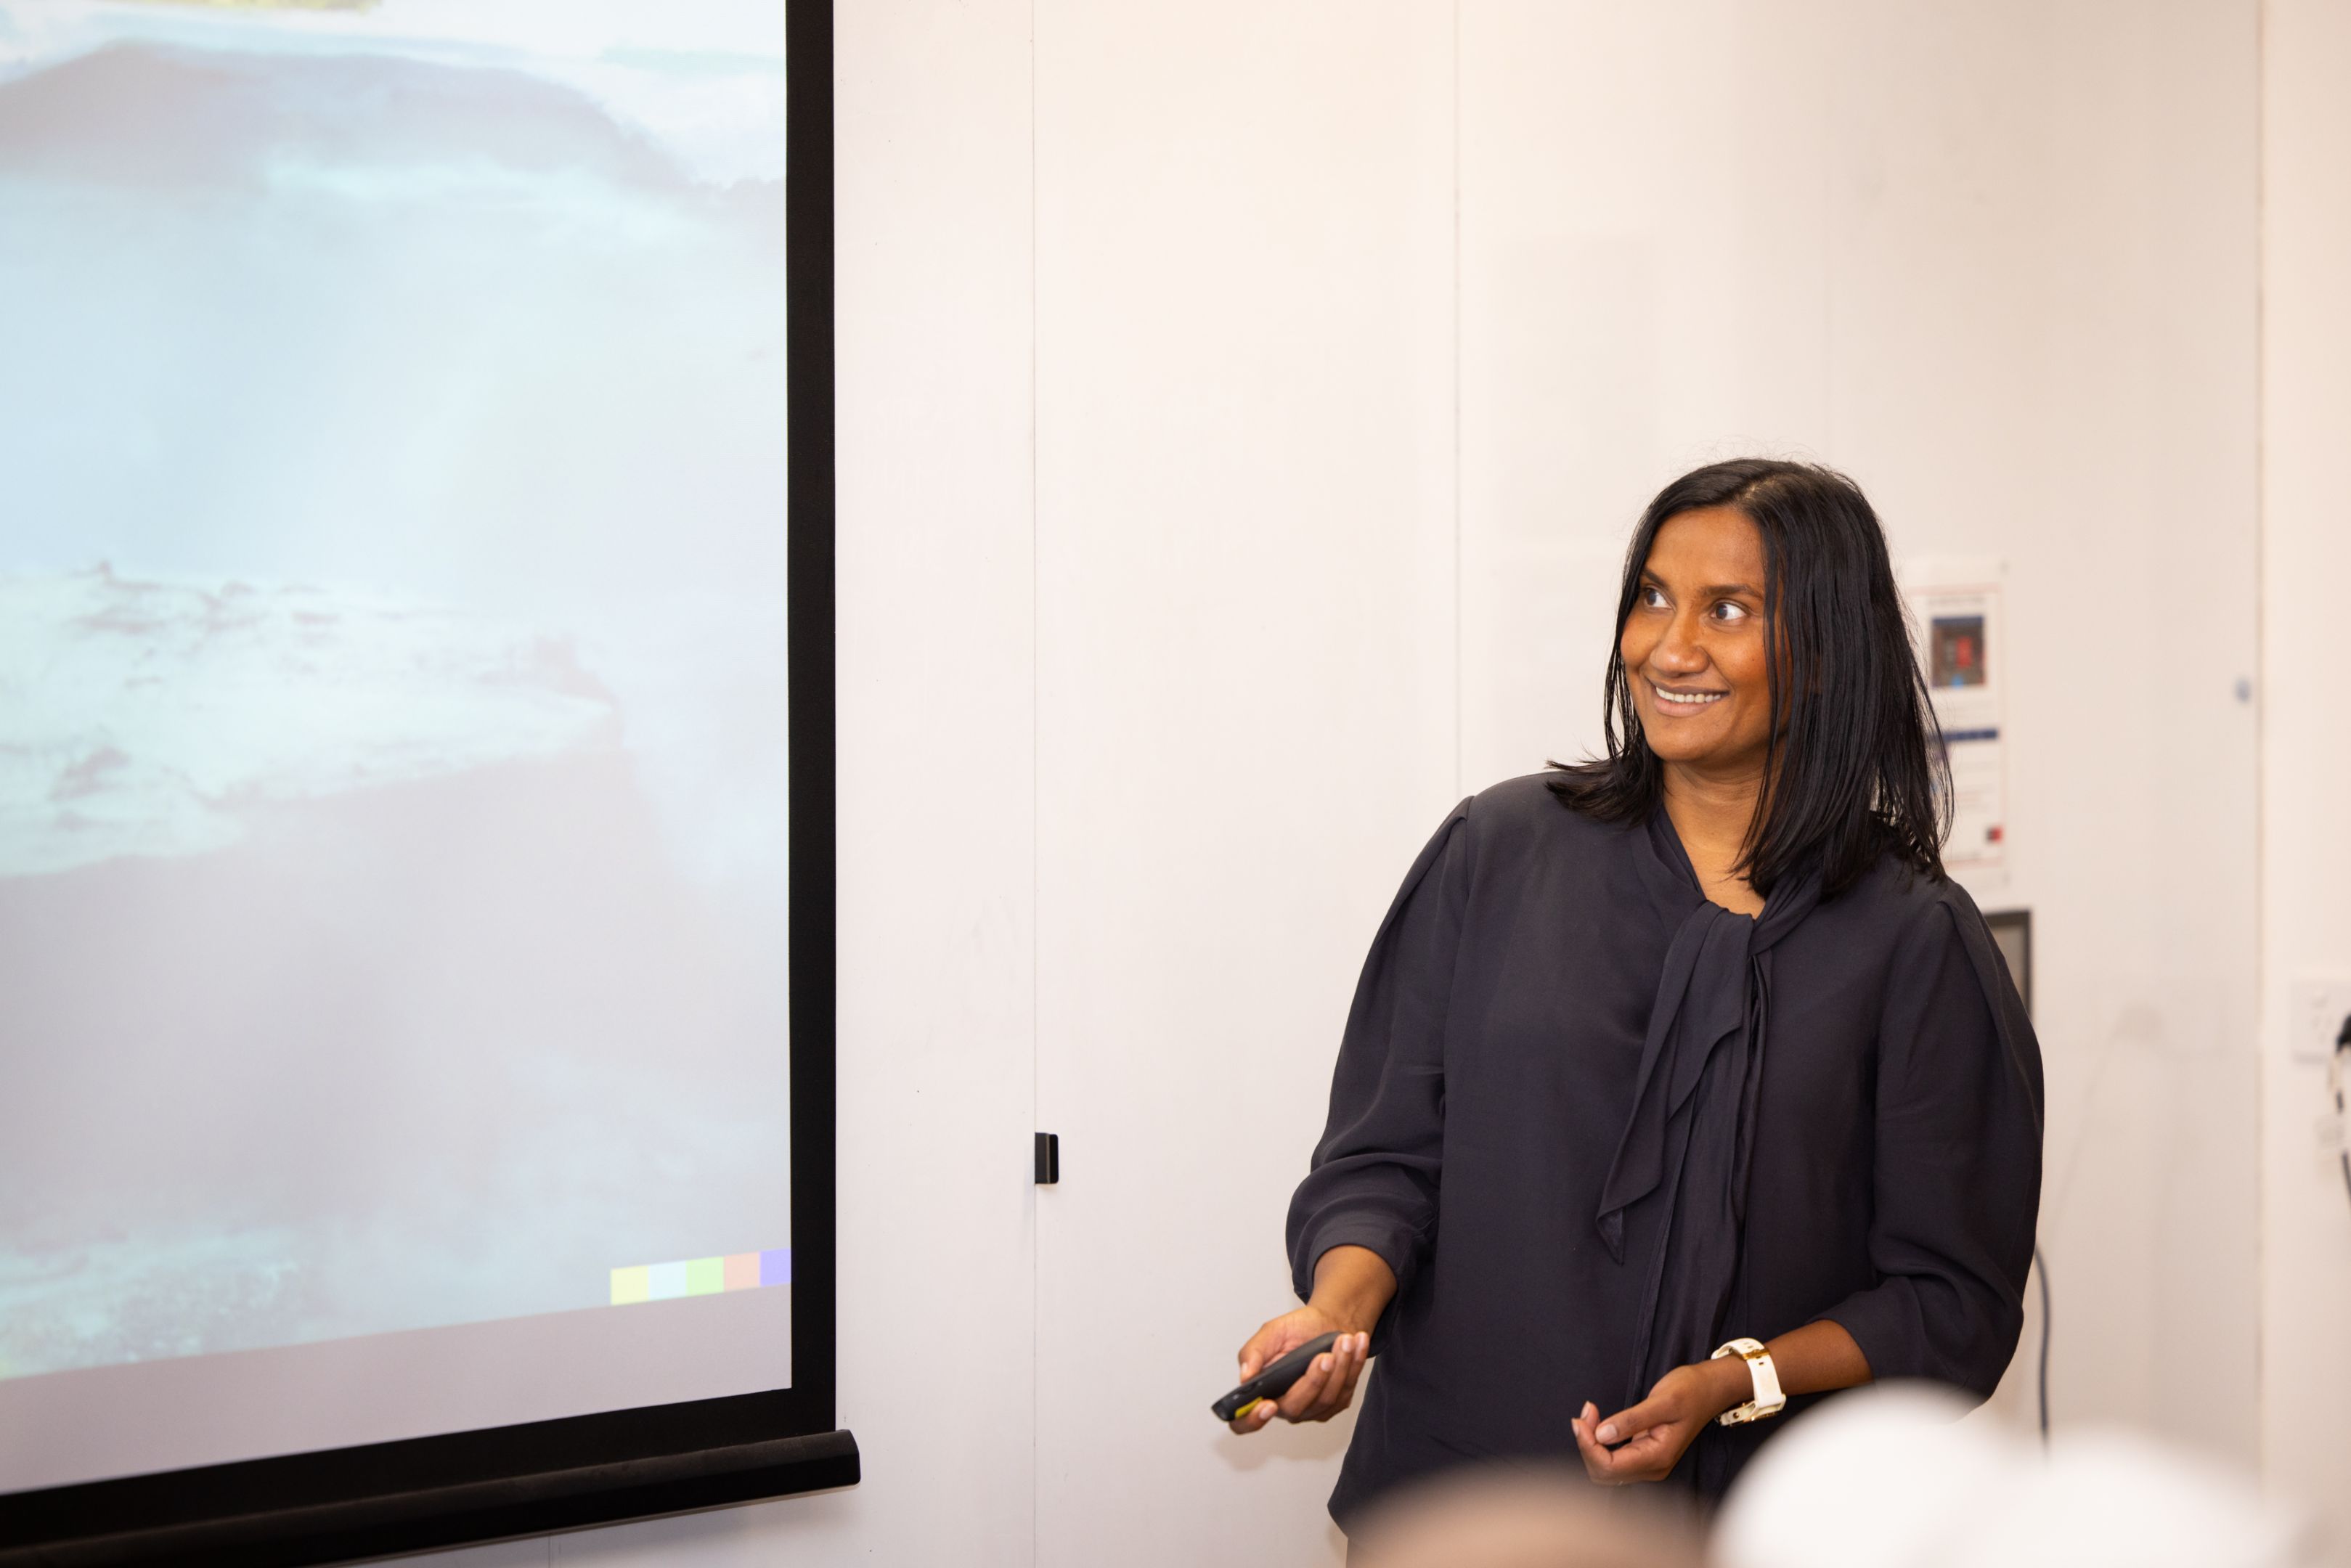 Mariyam Sayers presenting in front of a projector and smiling at the Pre-accelerator Pitch night.